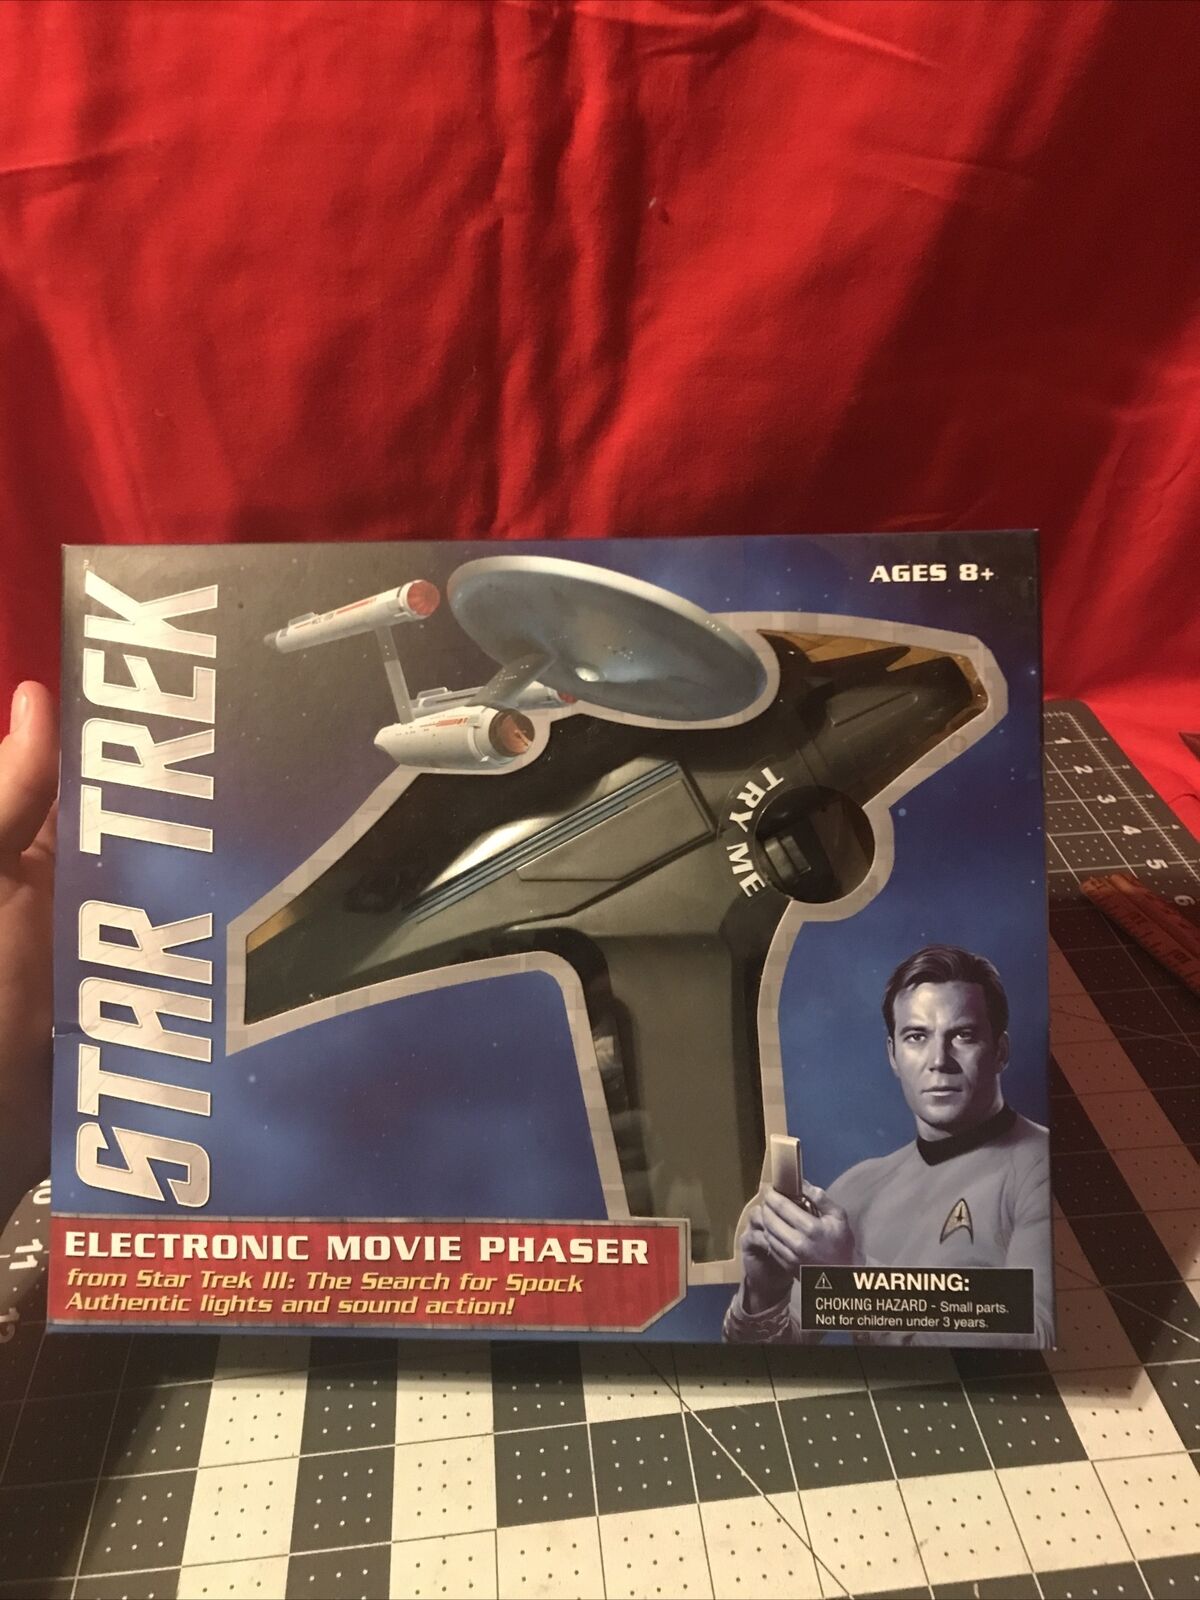 2015 Diamond Select Star Trek Electronic Movie Phaser Open Box (tested/works)